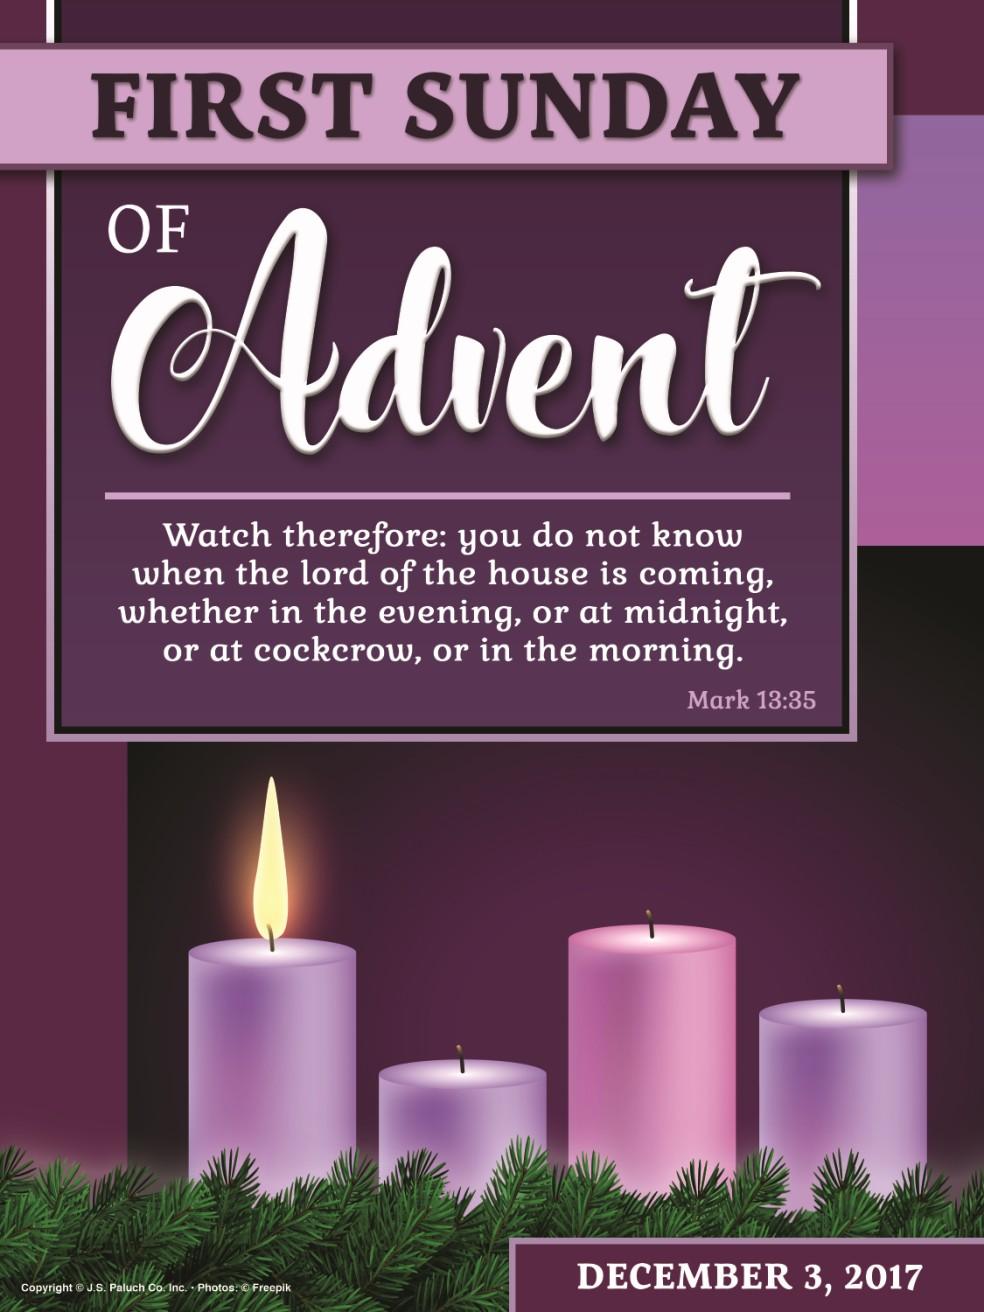 GOD HAS A DIFFERENT PLAN We begin the season of Advent with a heartfelt call for our own repentance. We remember God s faithful love for us, and call upon God to help us to turn back.